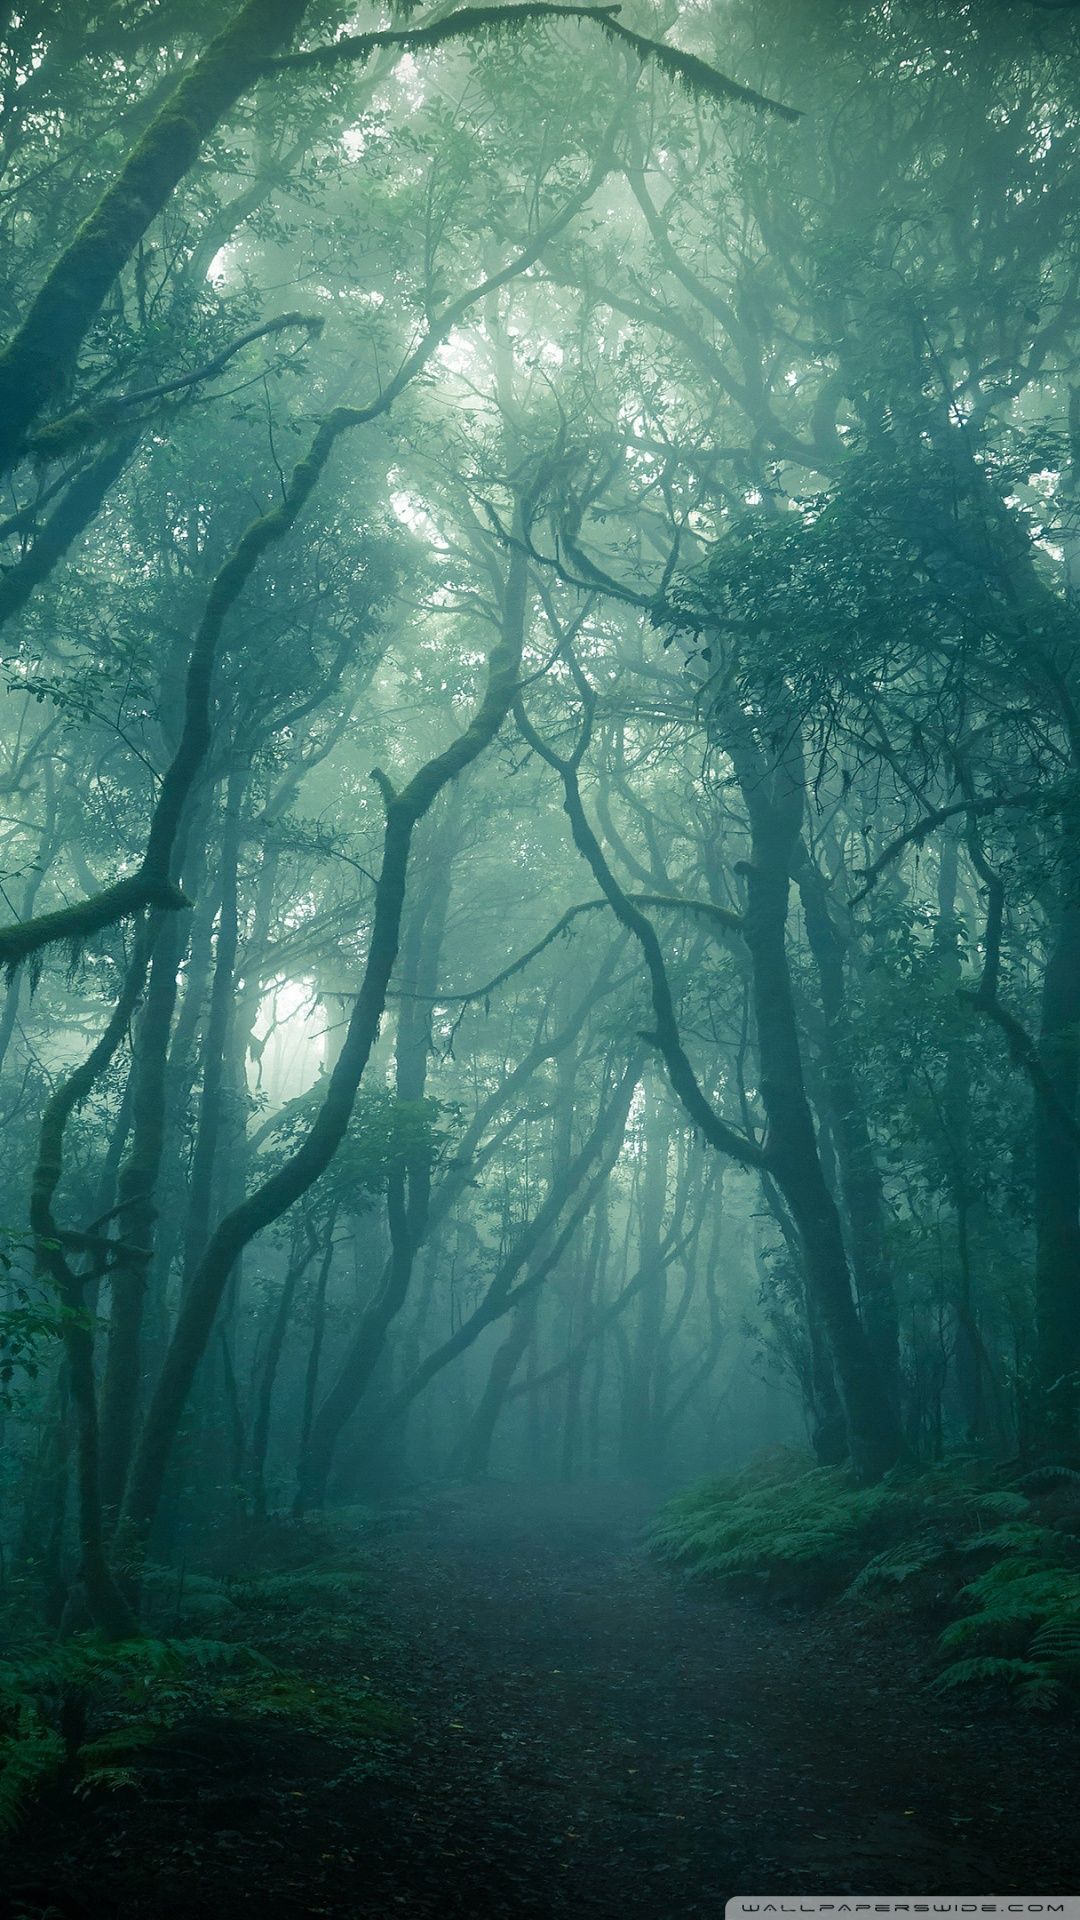 Forest in the fog wallpaper 1242x2208 for iPhone 8 - Woods